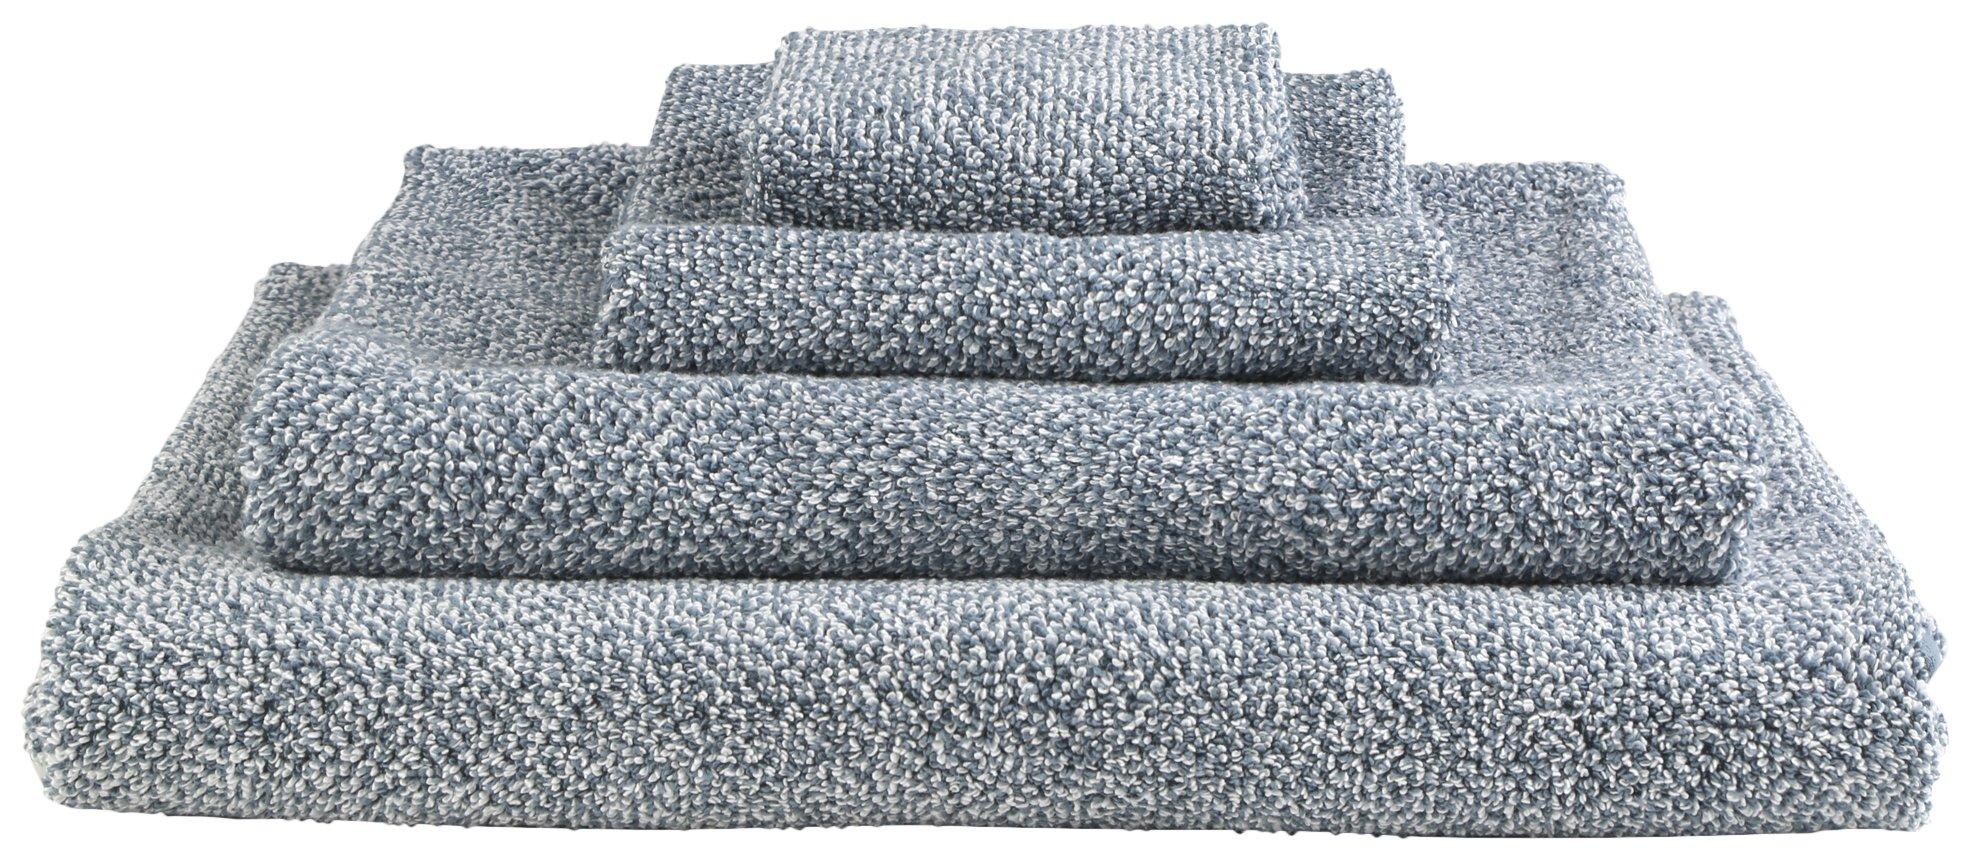 Mingled Towel Collection